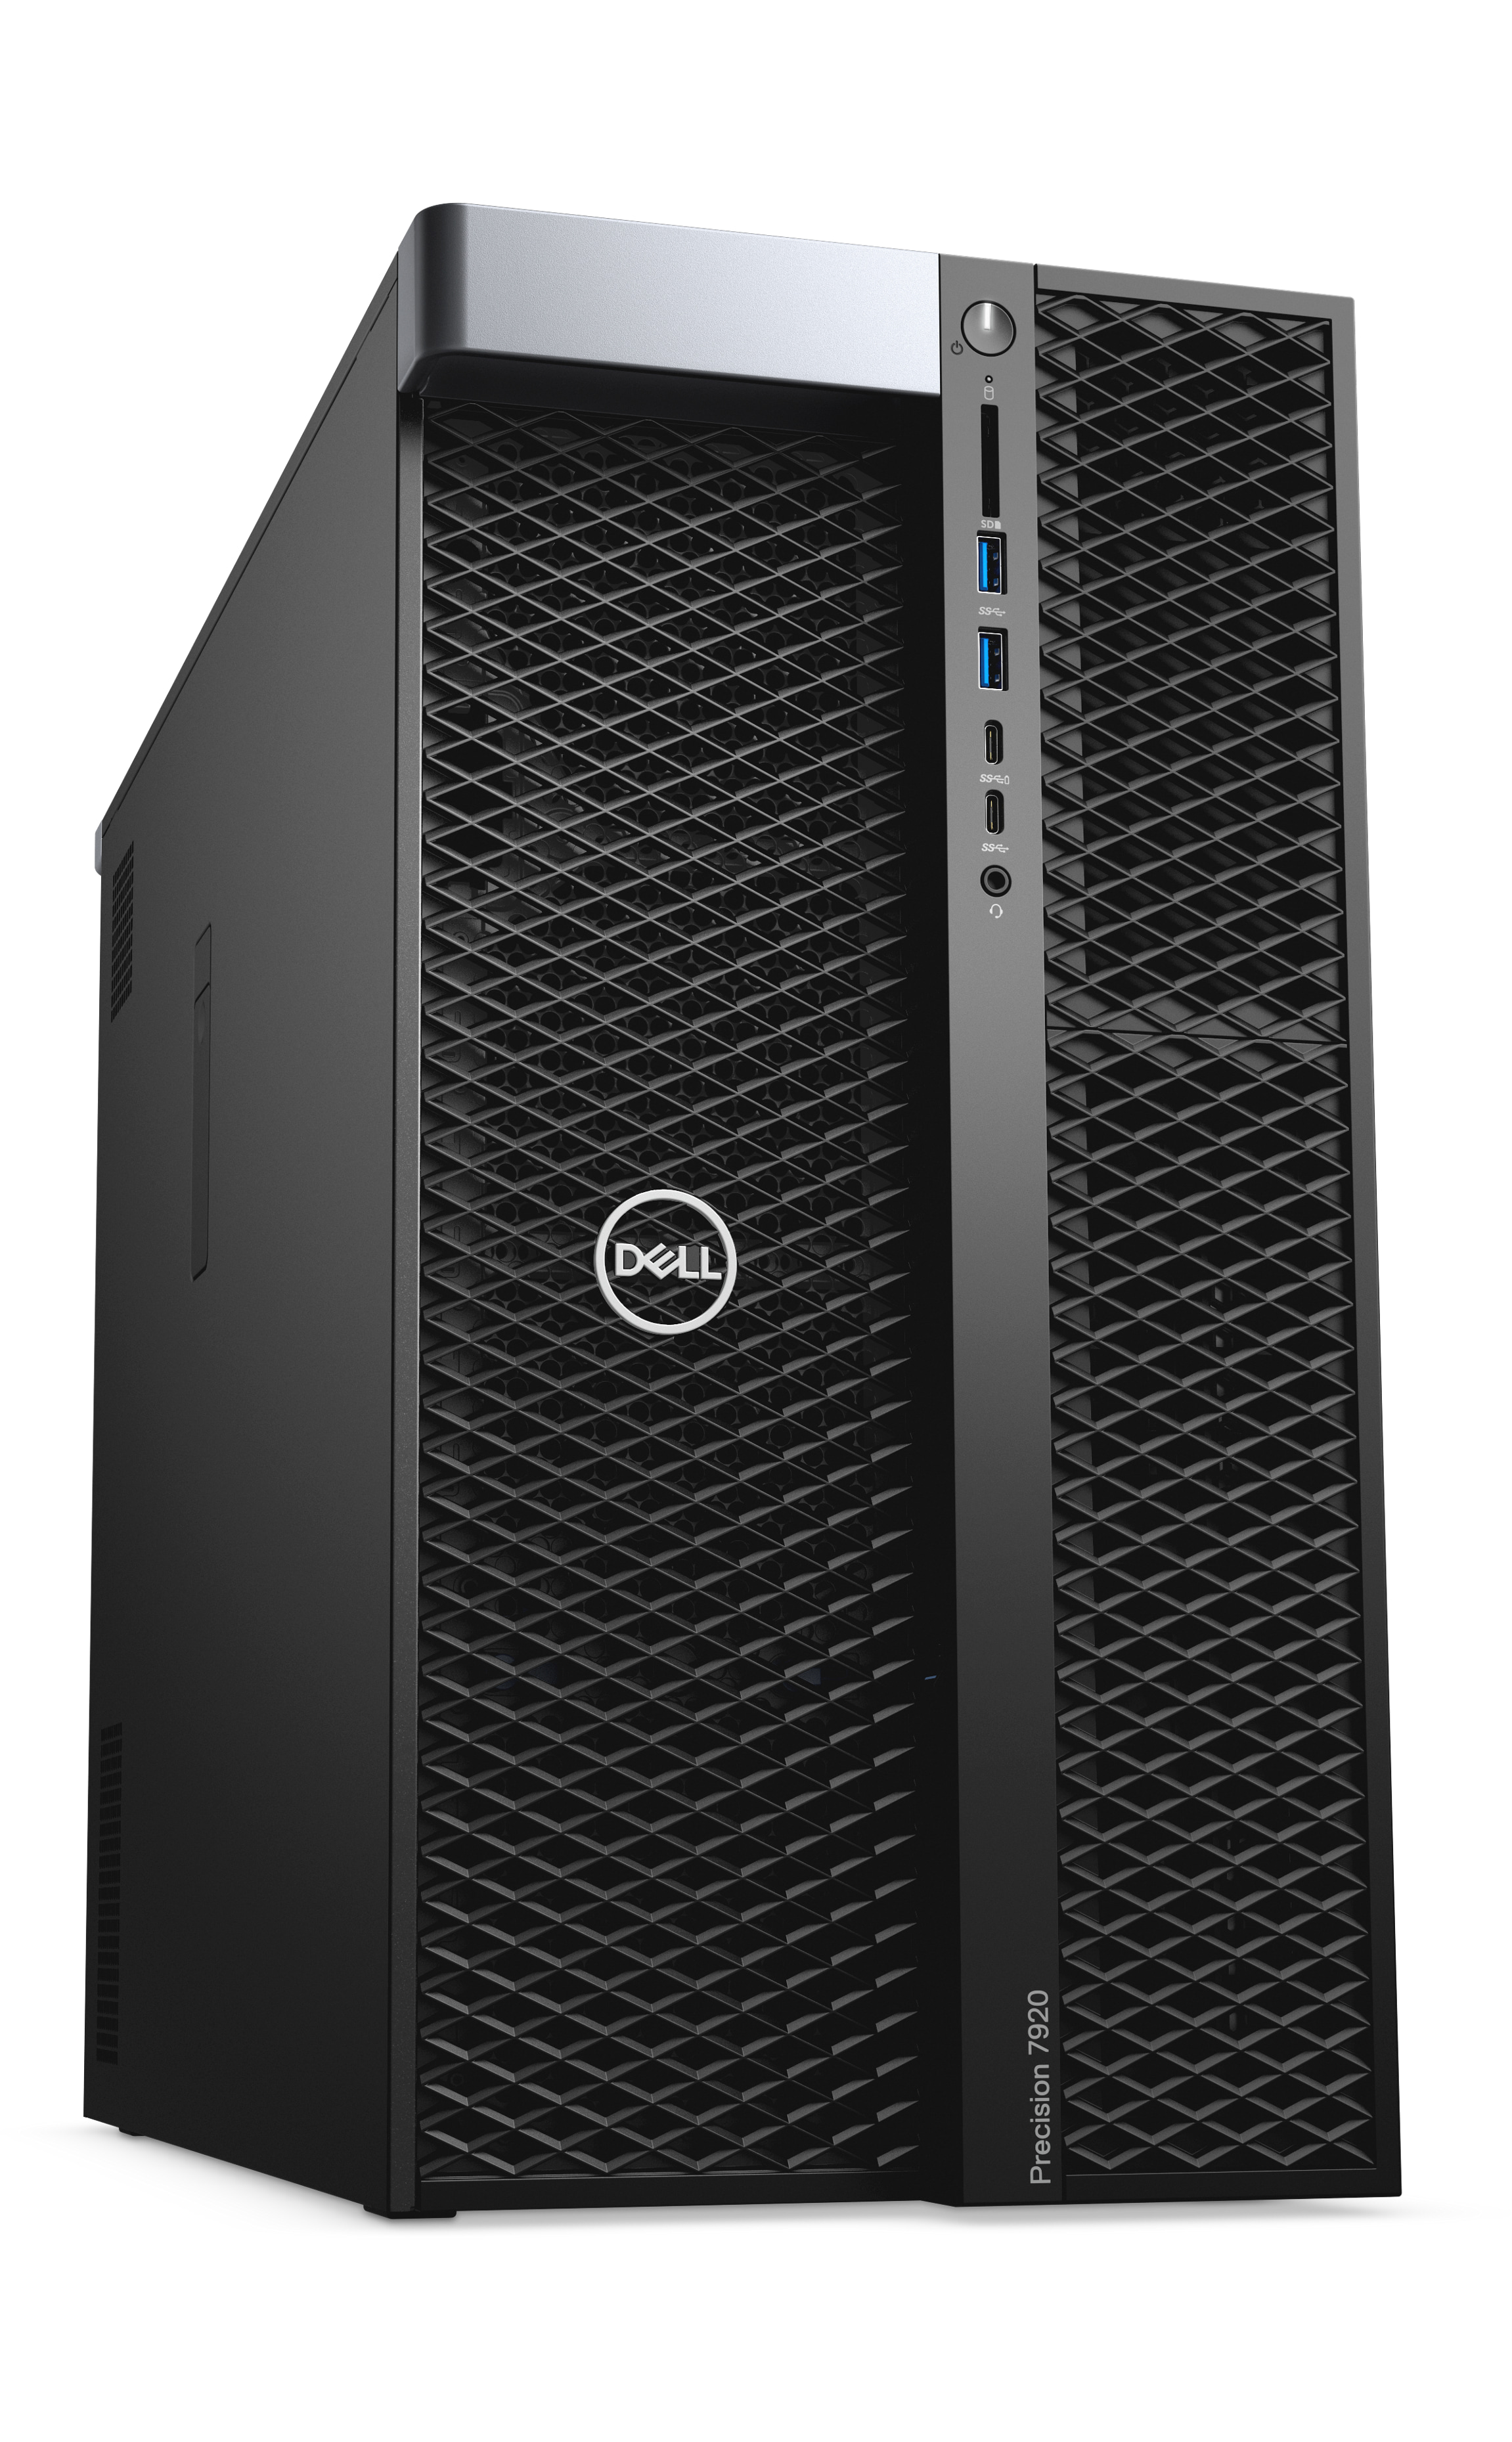 Precision 7920 Workstation Desktop Tower with Xeon Processor 